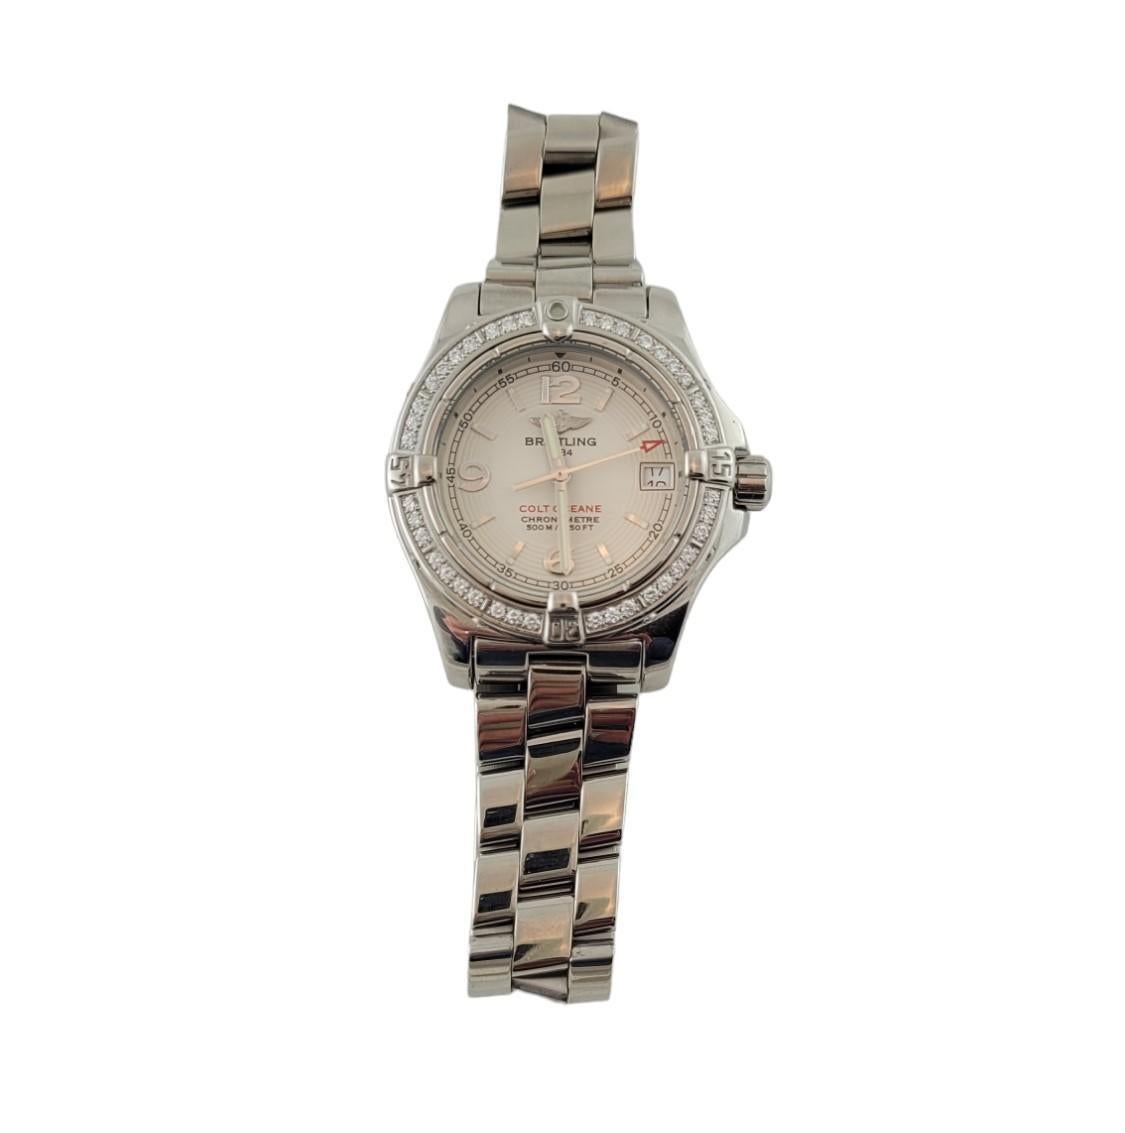 2007 Breitling Ladies Colt Oceane Diamond Watch A77380 Box/Papers # 17227 For Sale 1